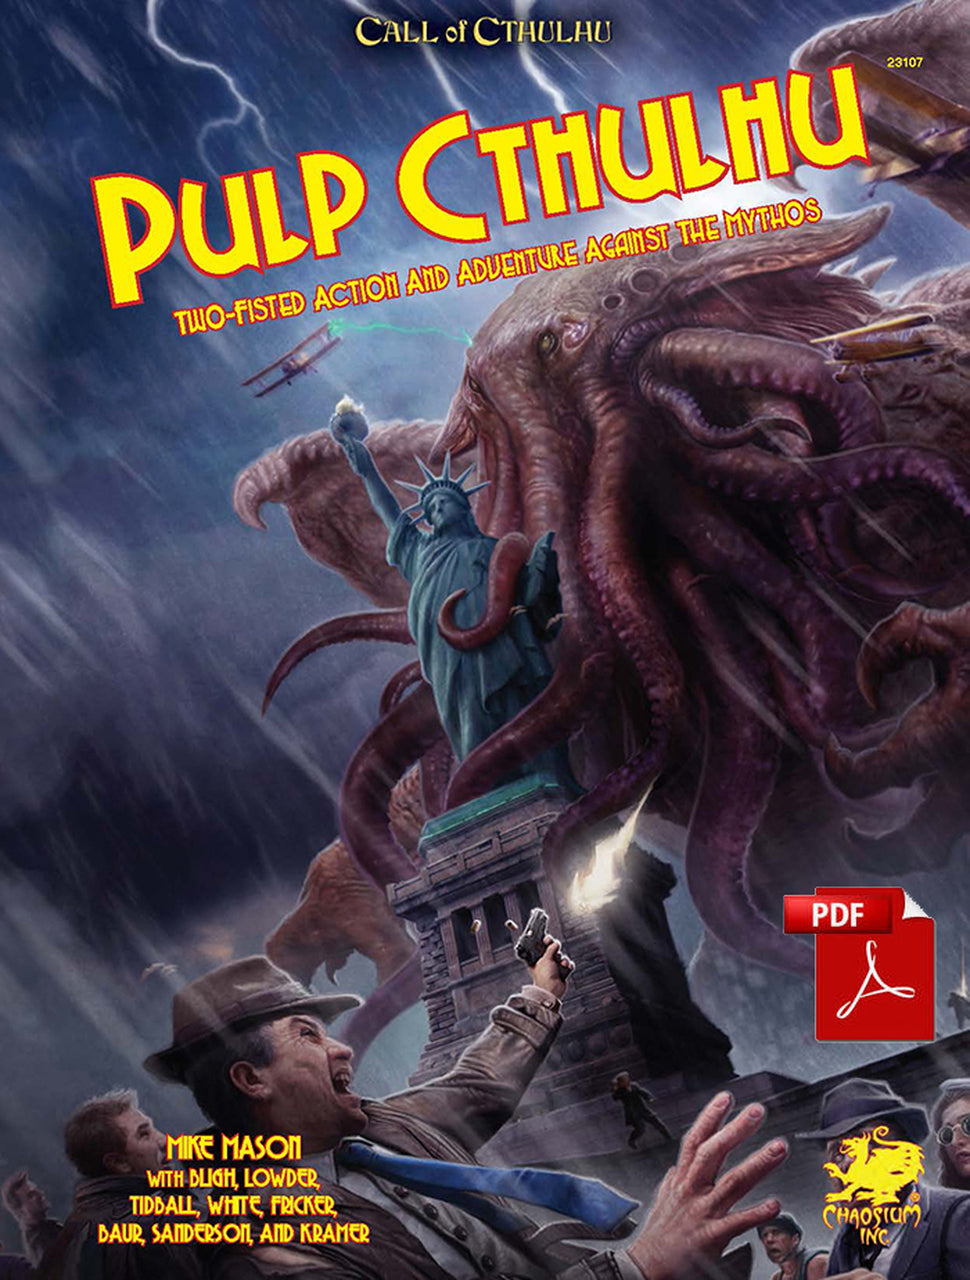 Call of Cthulhu - Pulp Cthulhu: Two-Fisted Action & Adventure Against The Mythos